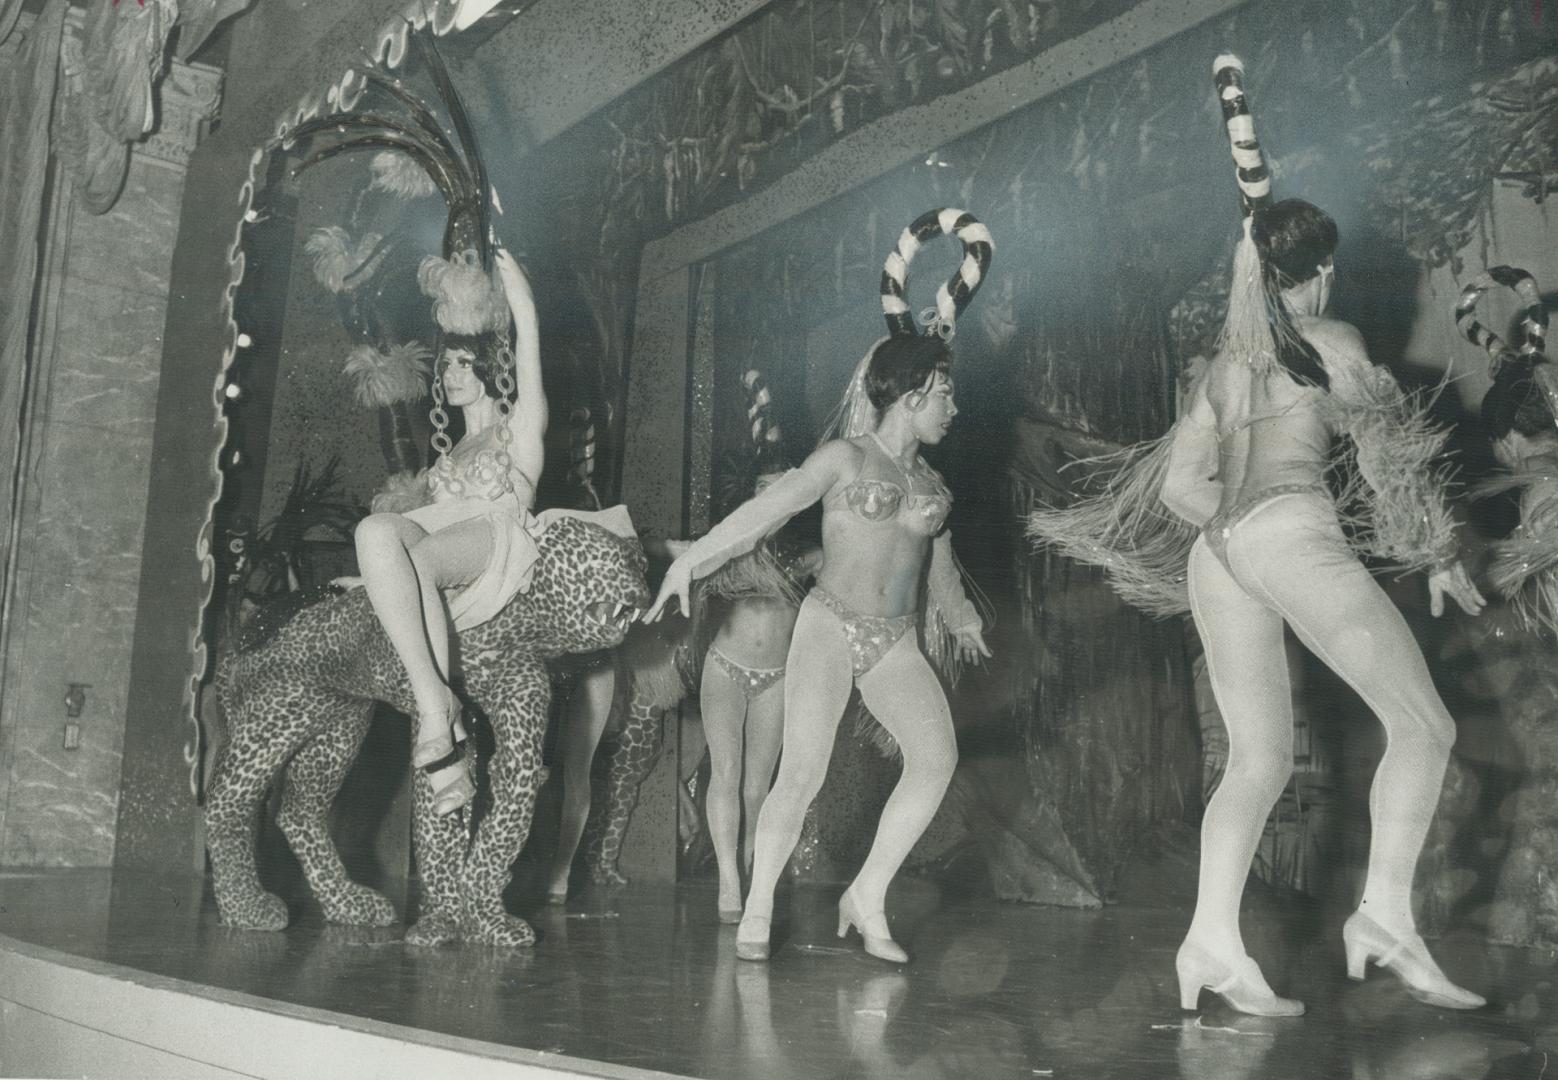 The Once-staid Imperial Room of Royal York Hotel resounded to the brassy music of bump and grind as chorus girls in scanty clothes danced for patrons (...)